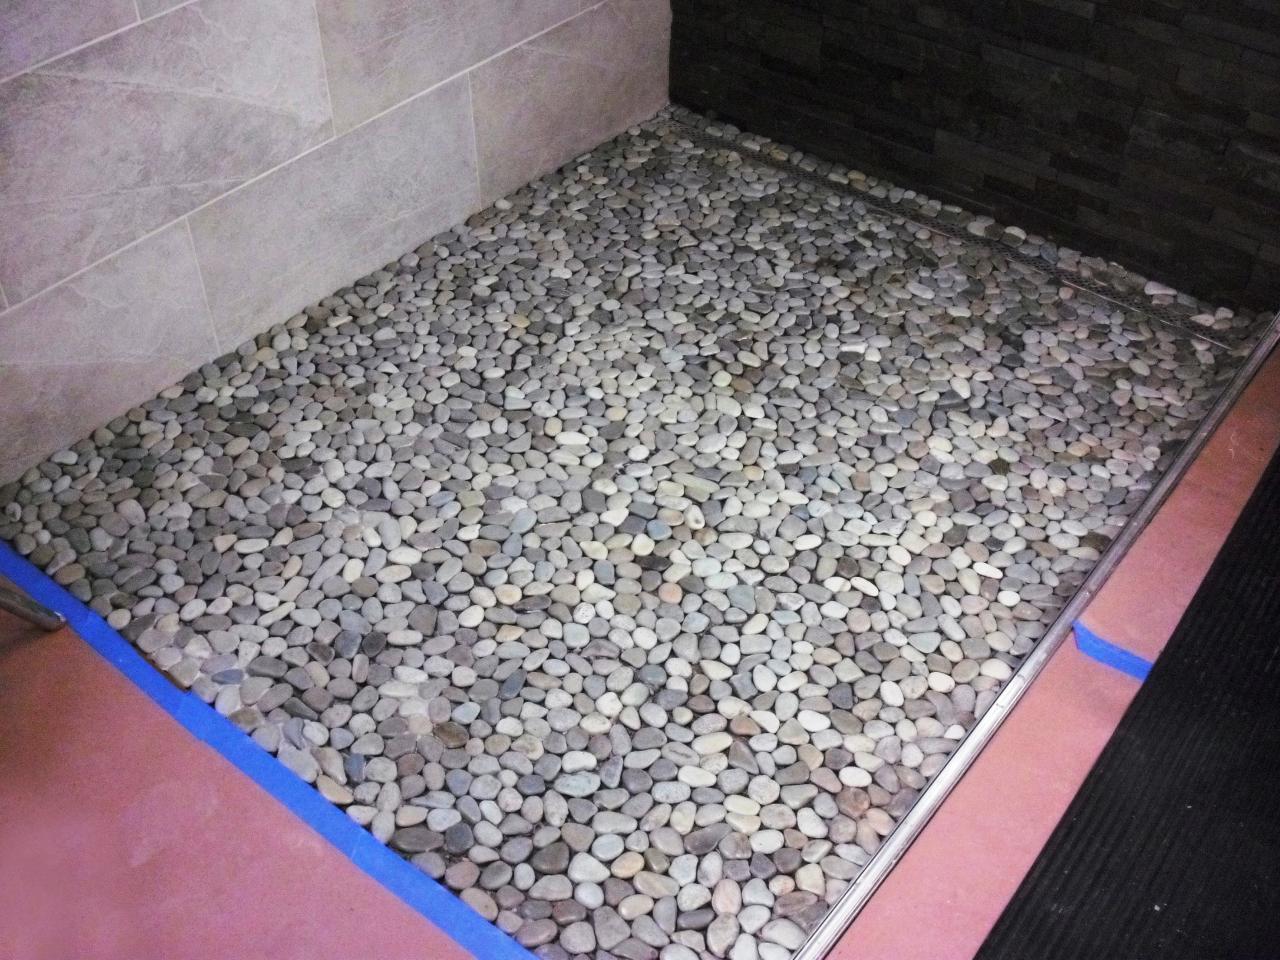 How To Lay A Pebble Tile Floor, How Do You Clean A Pebble Shower Floor